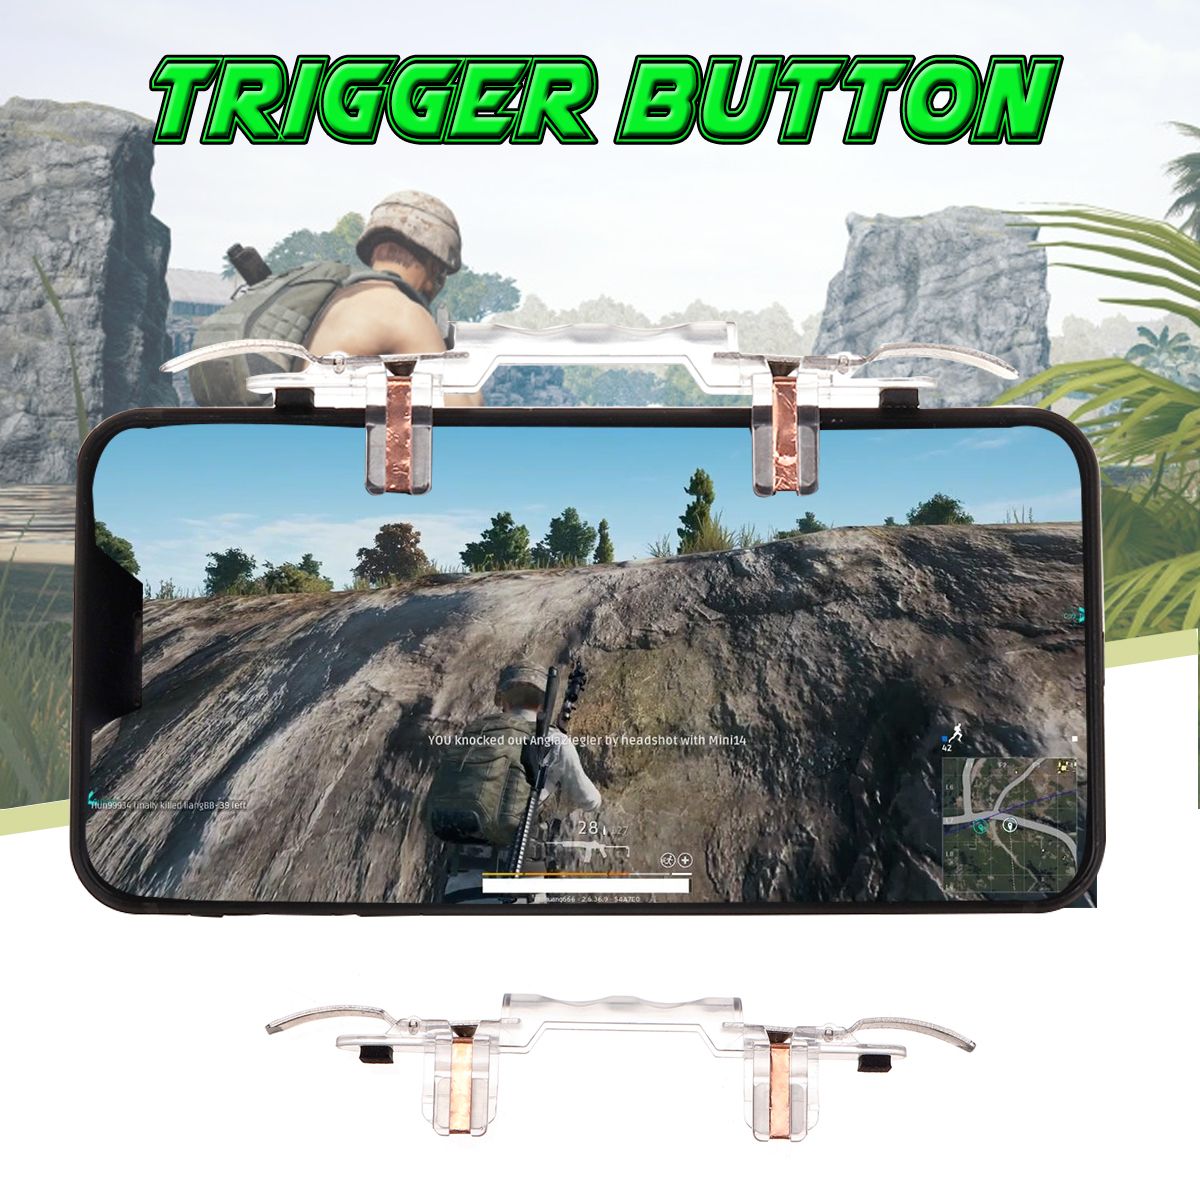 Joystic-Gamepad-Trigger-Fire-Button-Assist-Tool-Game-Controller-for-PUBG-Mobile-Game-for-Smartphone-1429981